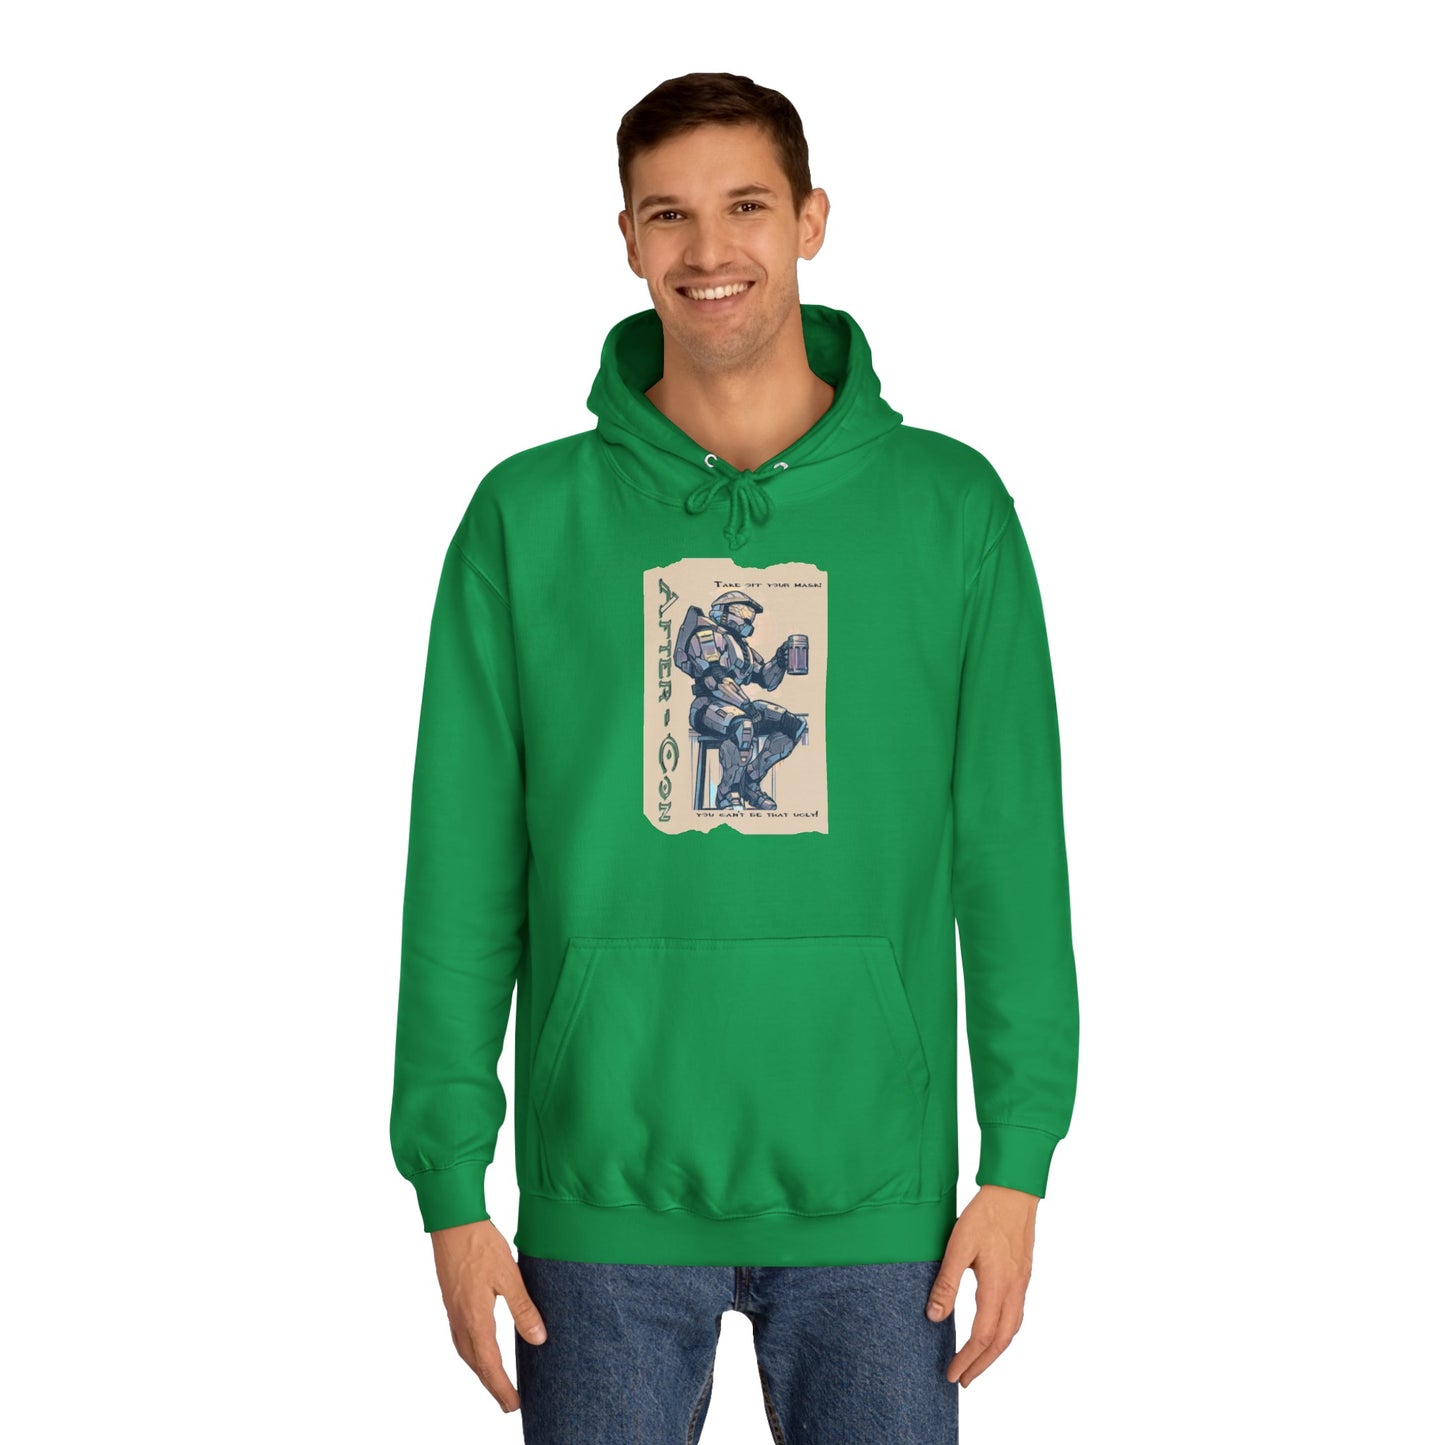 After-Con "Take Off Your Mask" Unisex College Hoodie